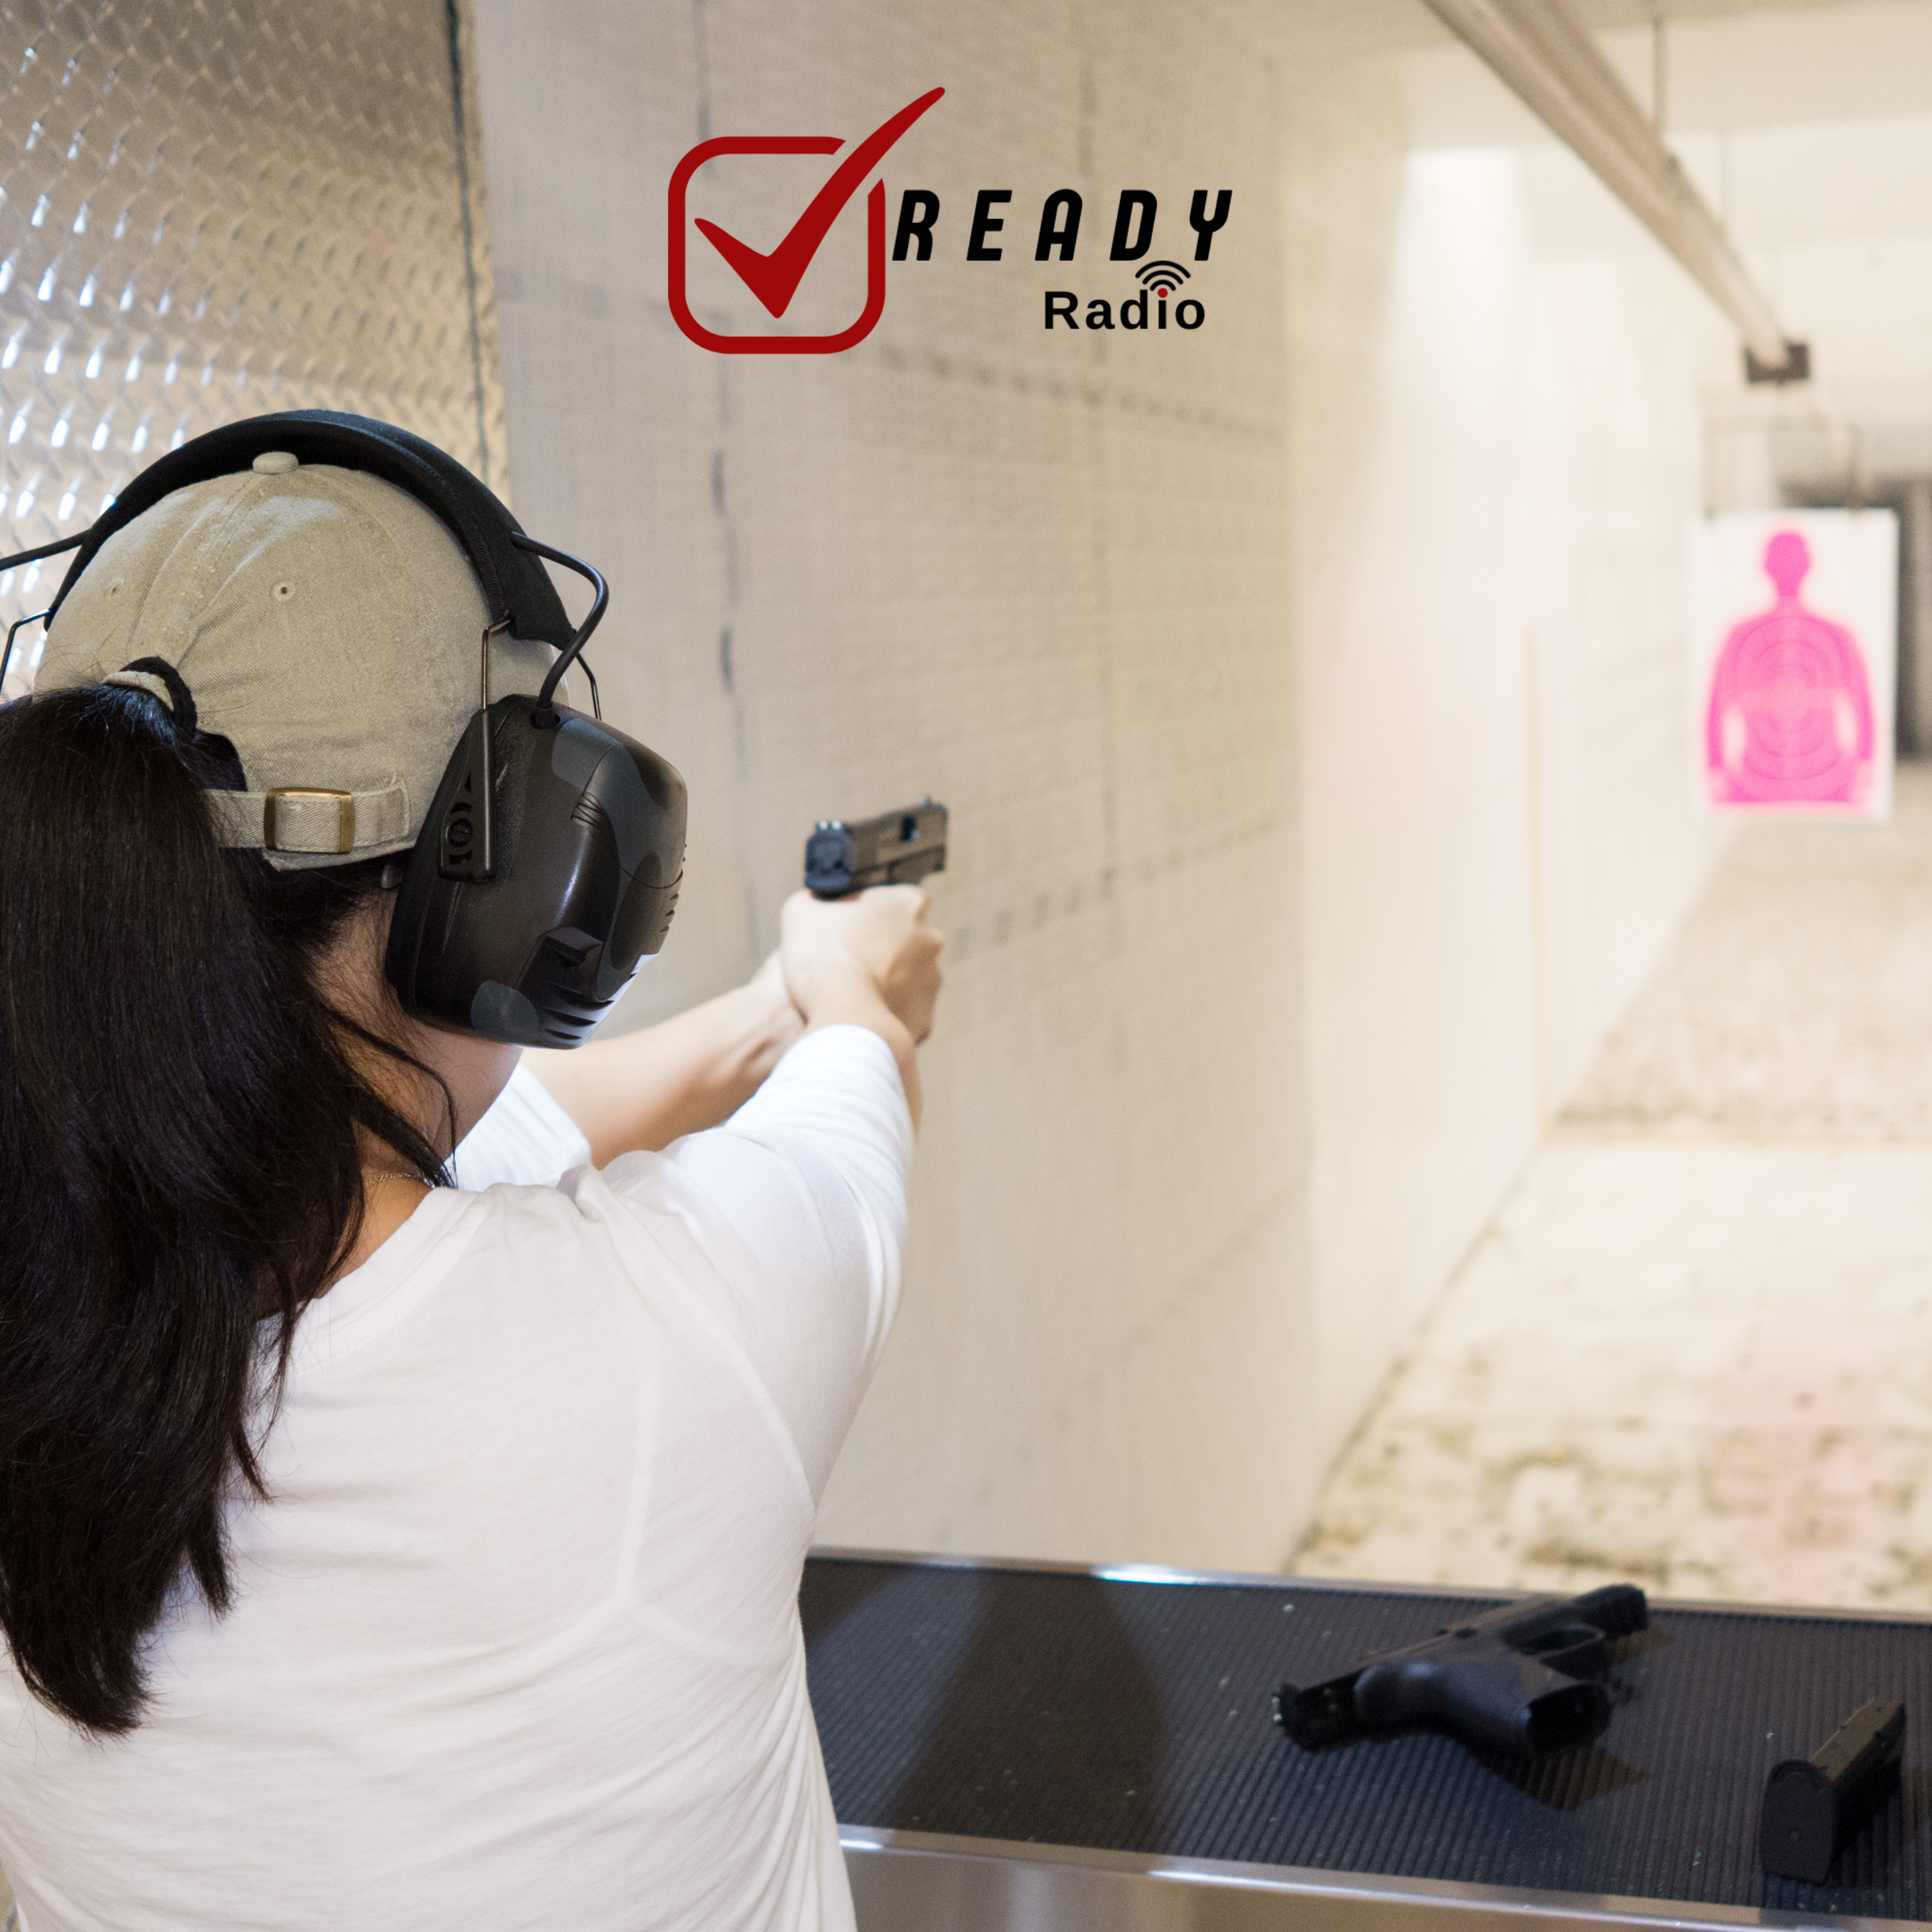 Firearm Safety - There's Always Something to Learn